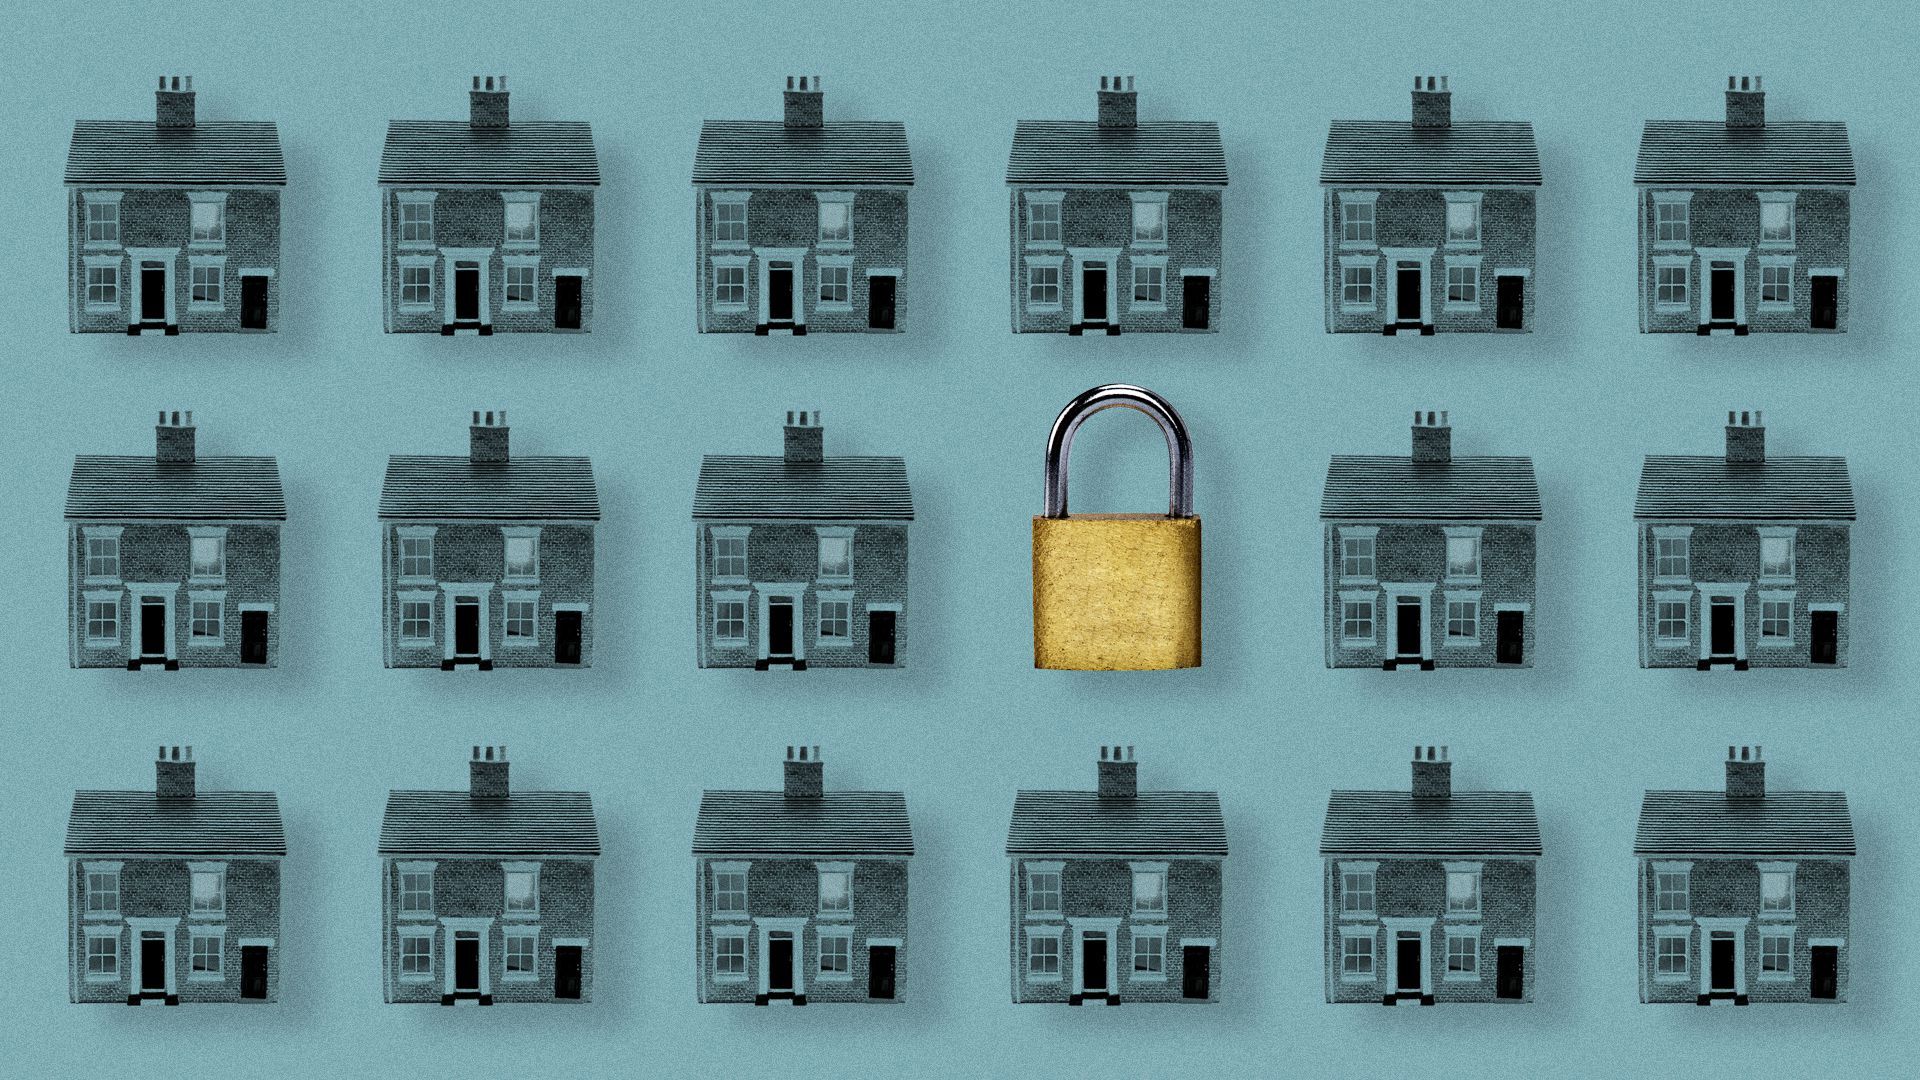 Three rows of identical houses on a blue background, with one of the houses replaced with a lock.